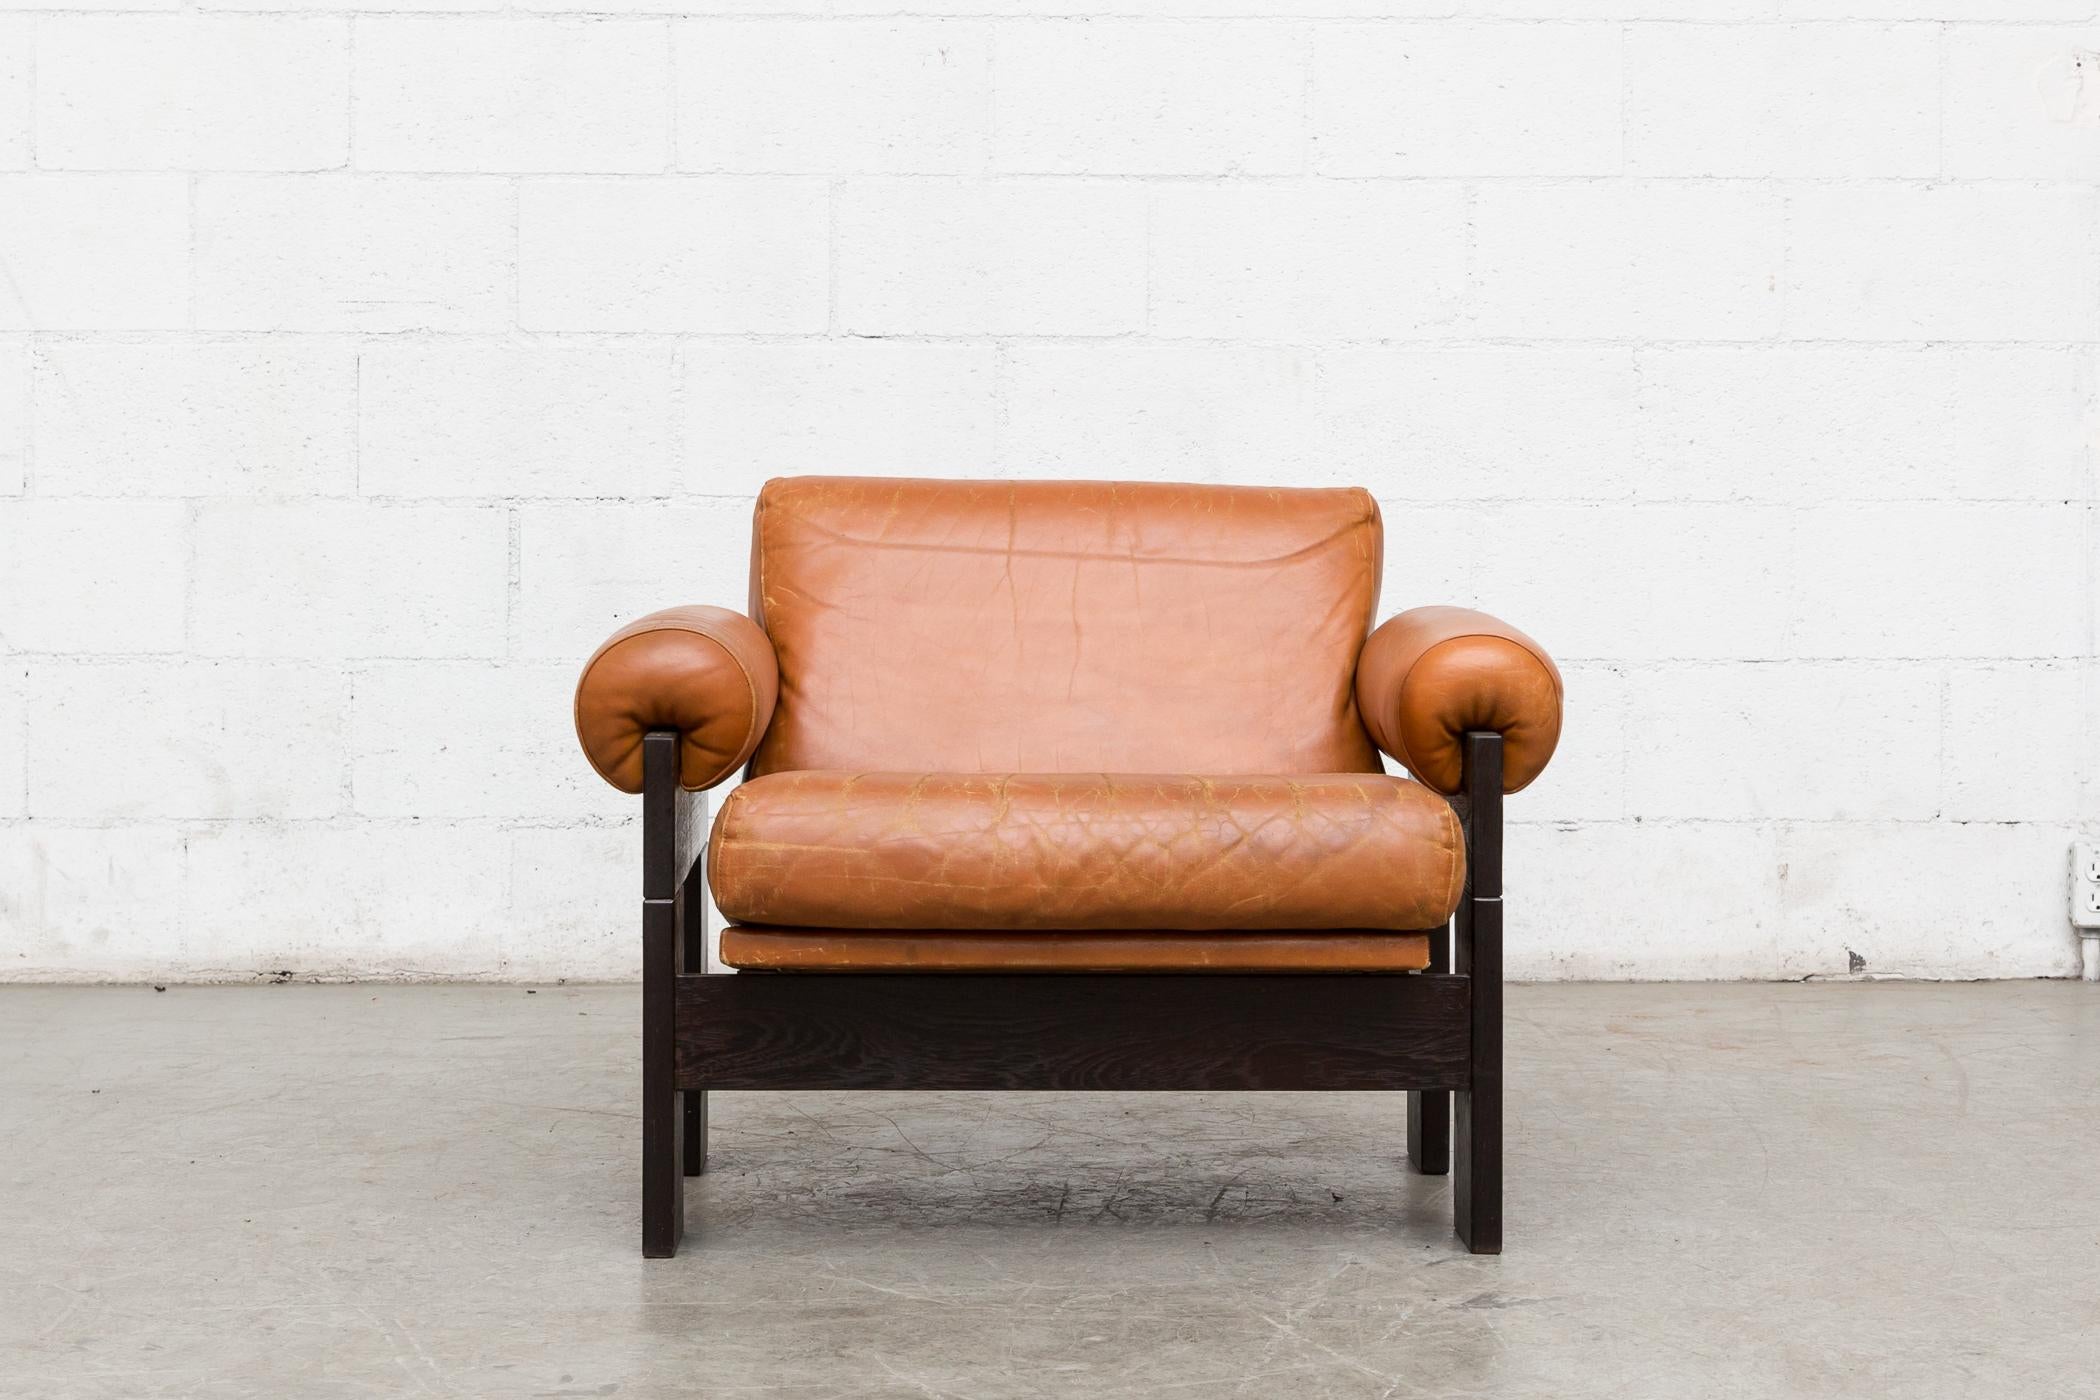 Handsome rust leather and wenge lounge chair by Martin Visser for t'Spectrum, 1970s, Holland. In very original condition with visible wear and cracking to the leather. Wear consistent with age and use.